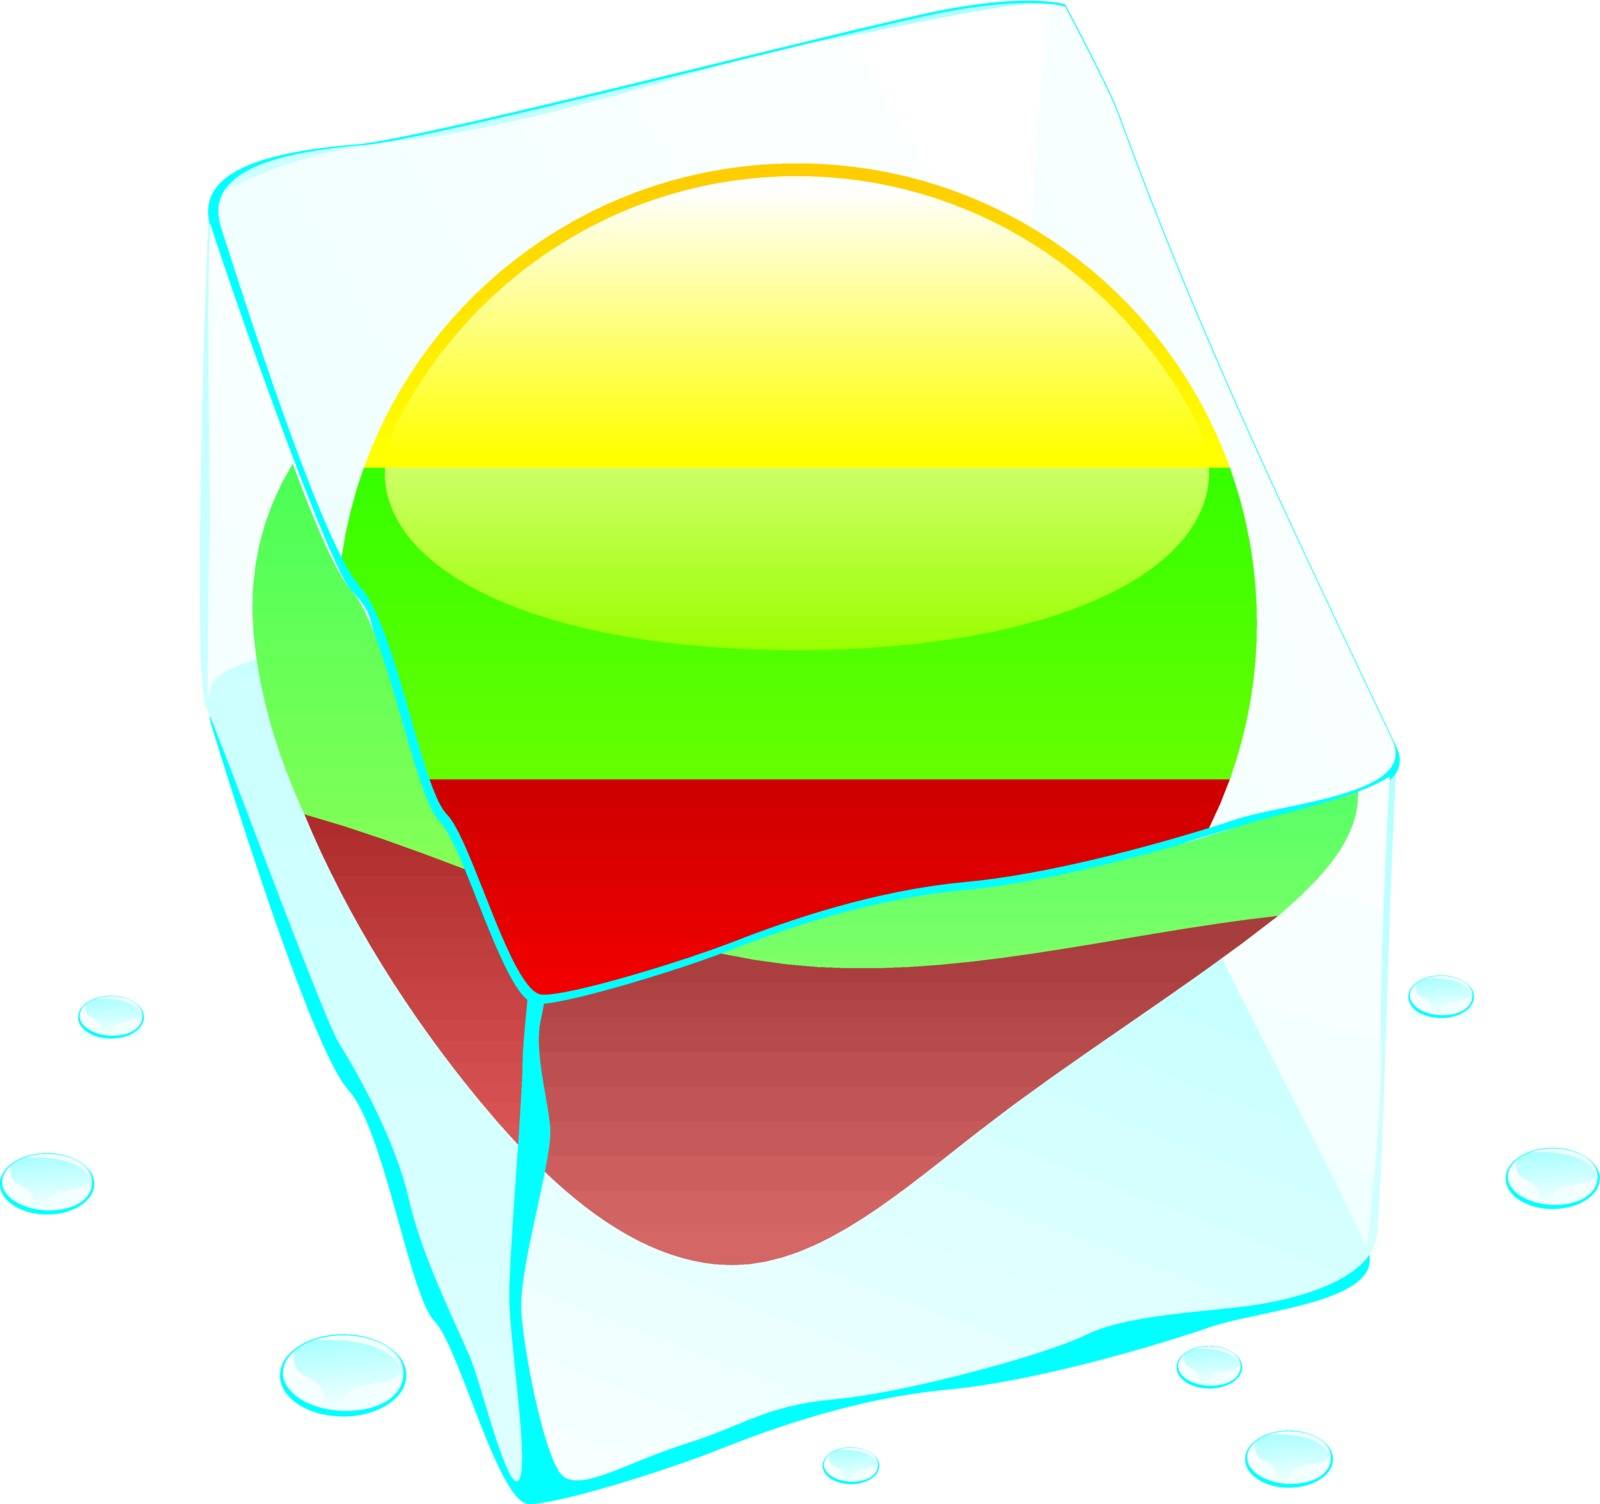 fully editable vector illustration of lithuania button flag frozen in ice cube